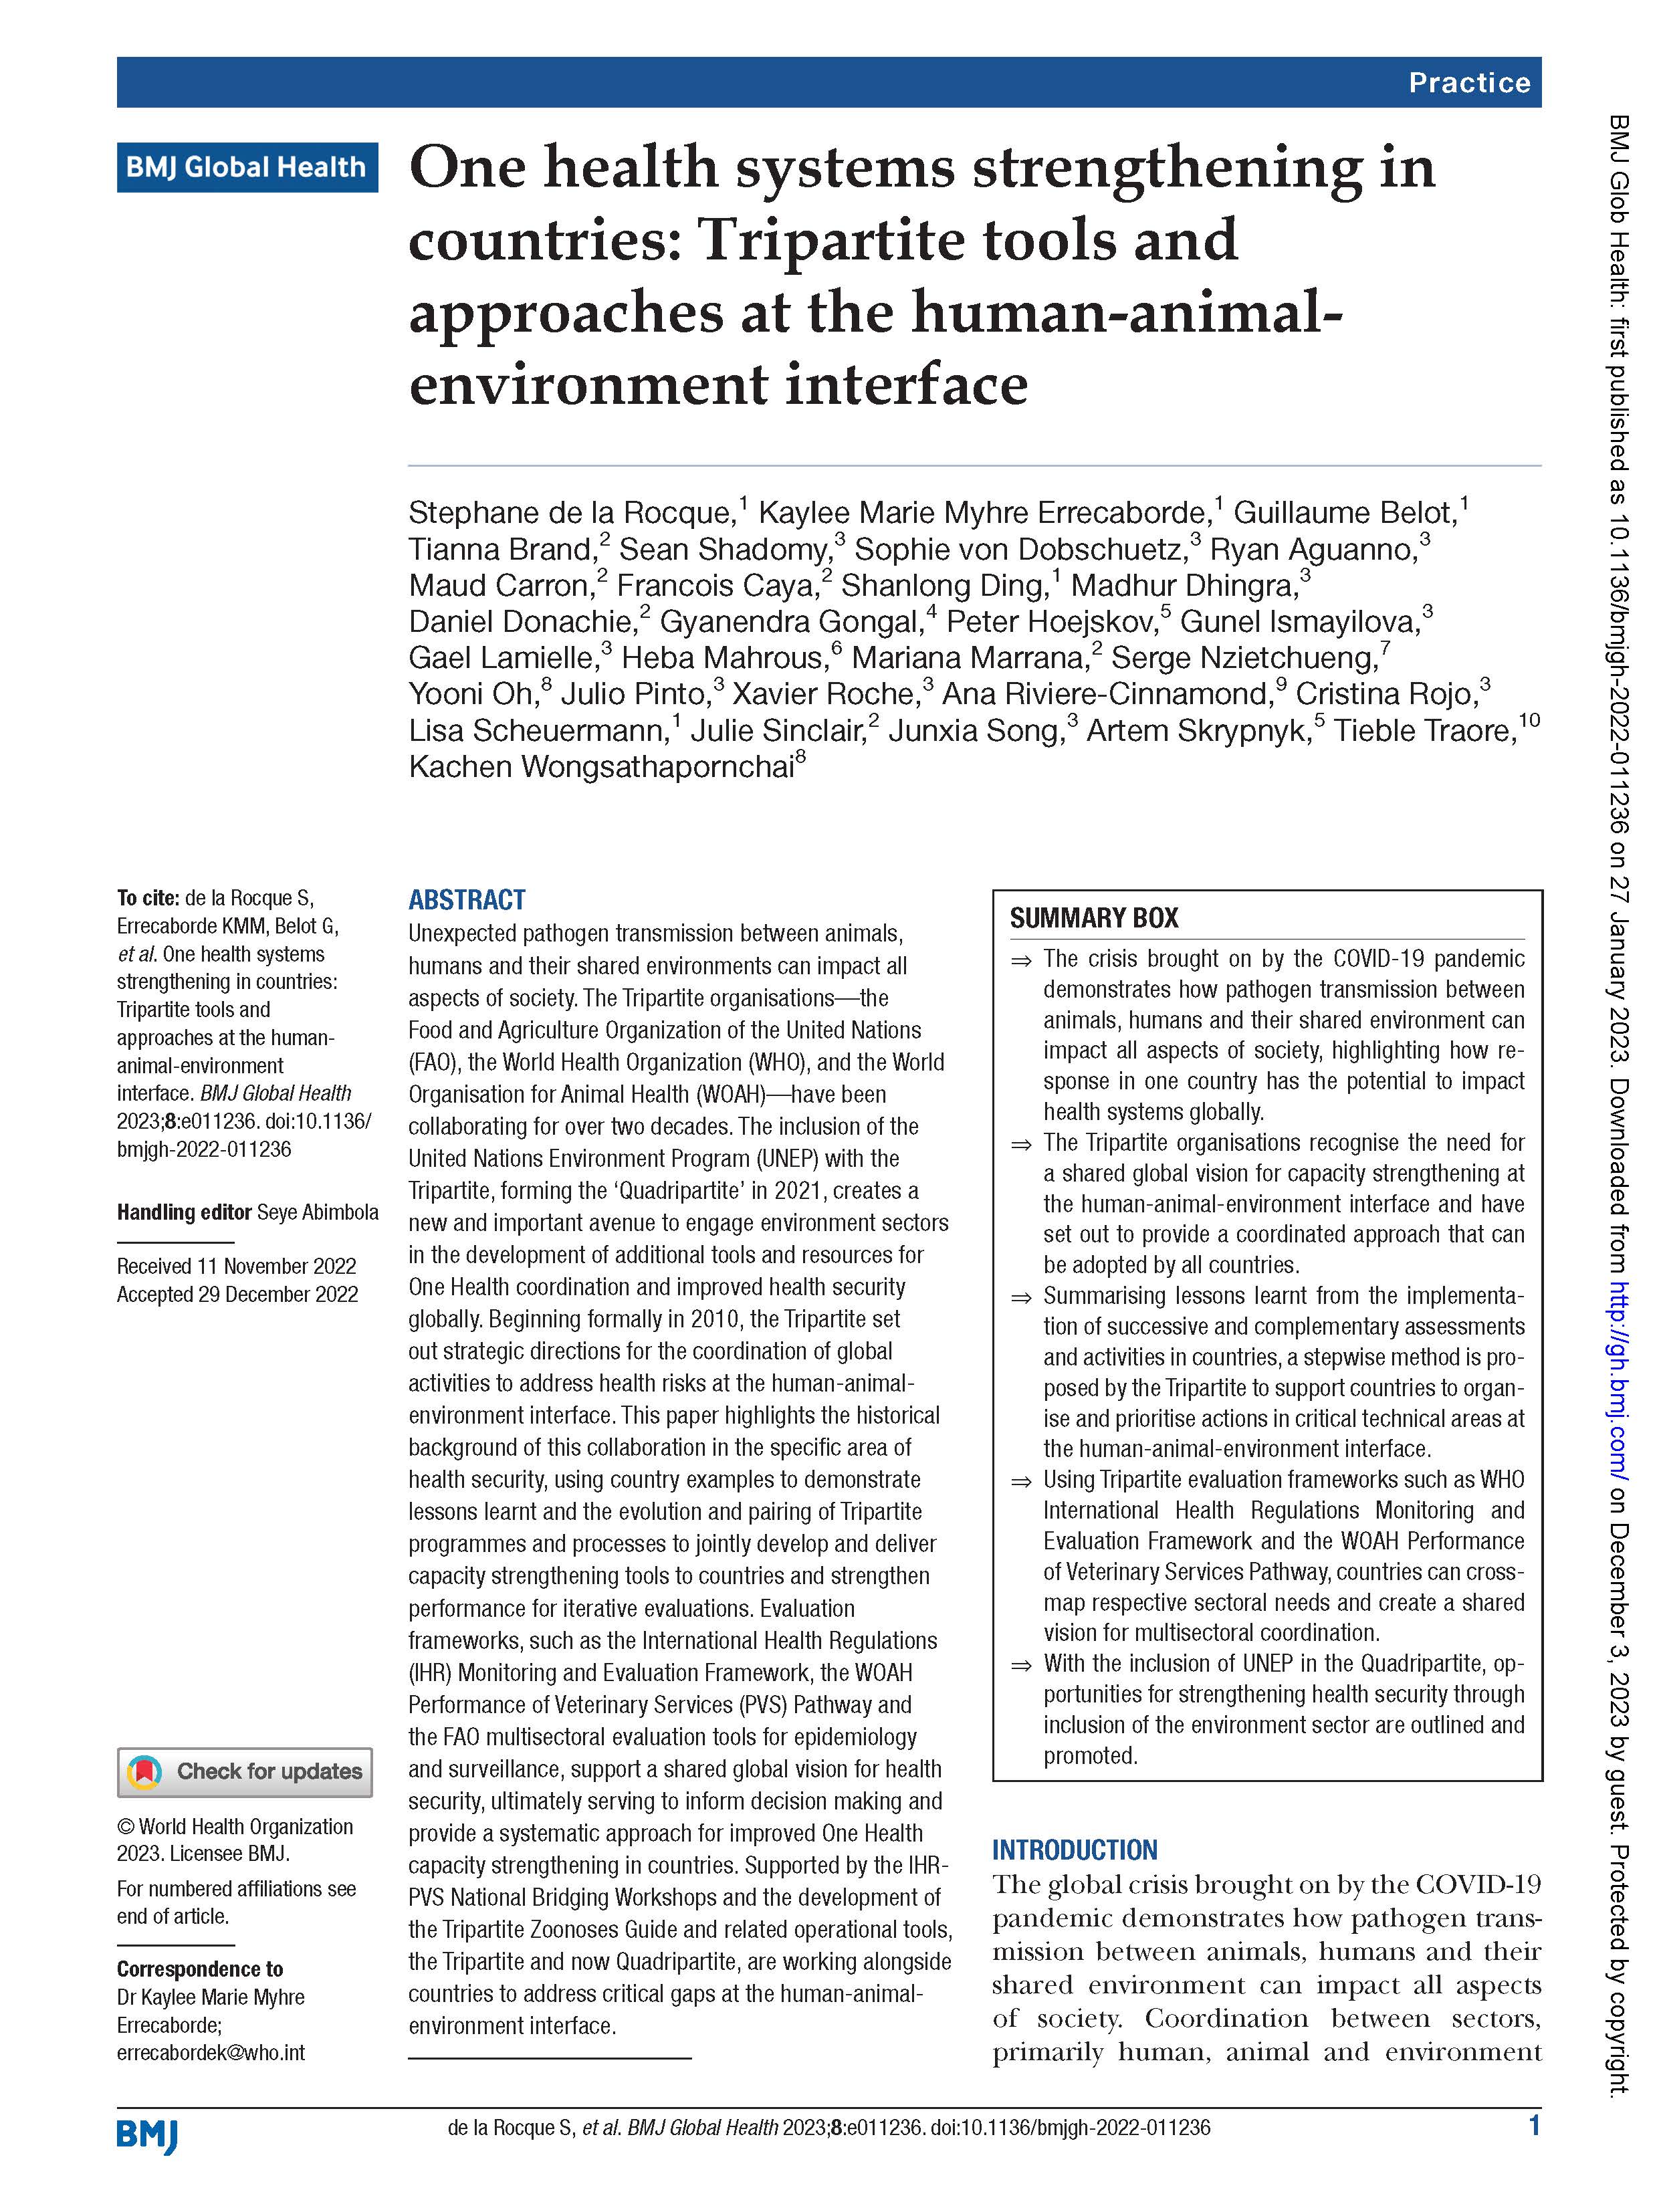 one_health_systems_strengthening_in_countries_tripartite_tools_and_approaches_at_the_human-animal-environment_interface